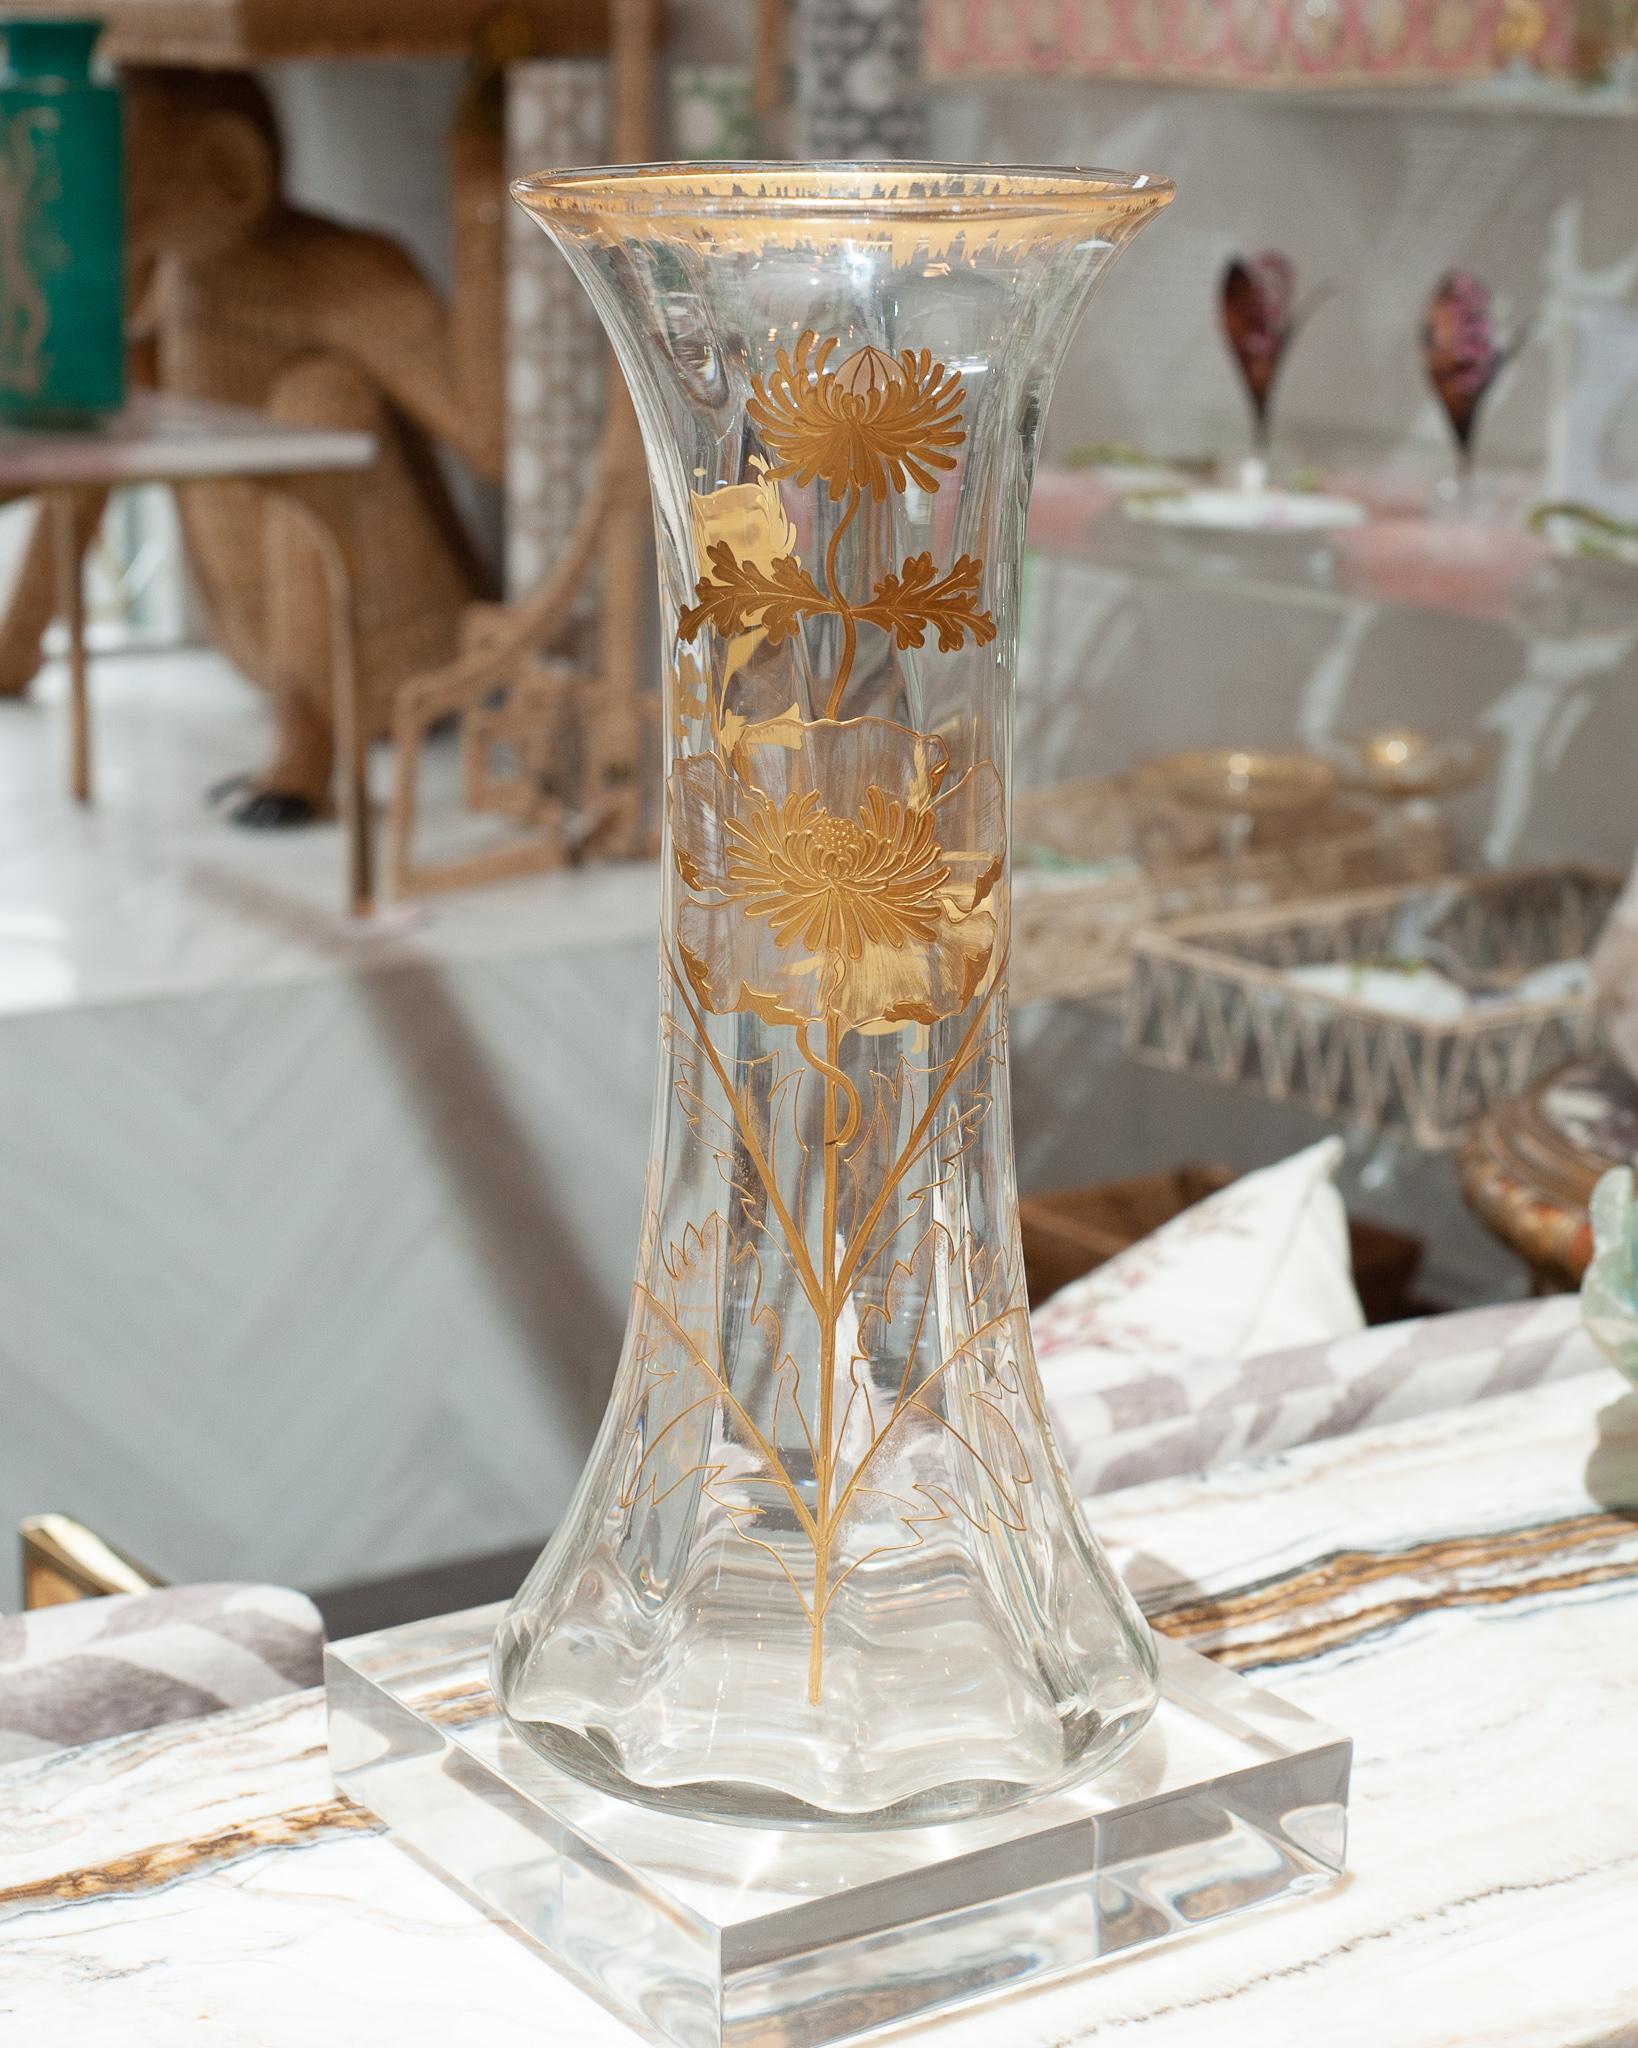 A beautiful antique French large glass vase, ornately gilded with flowers and leaves. A beautiful large piece for any table or console. Minor wear to gilding consistent with age and use.